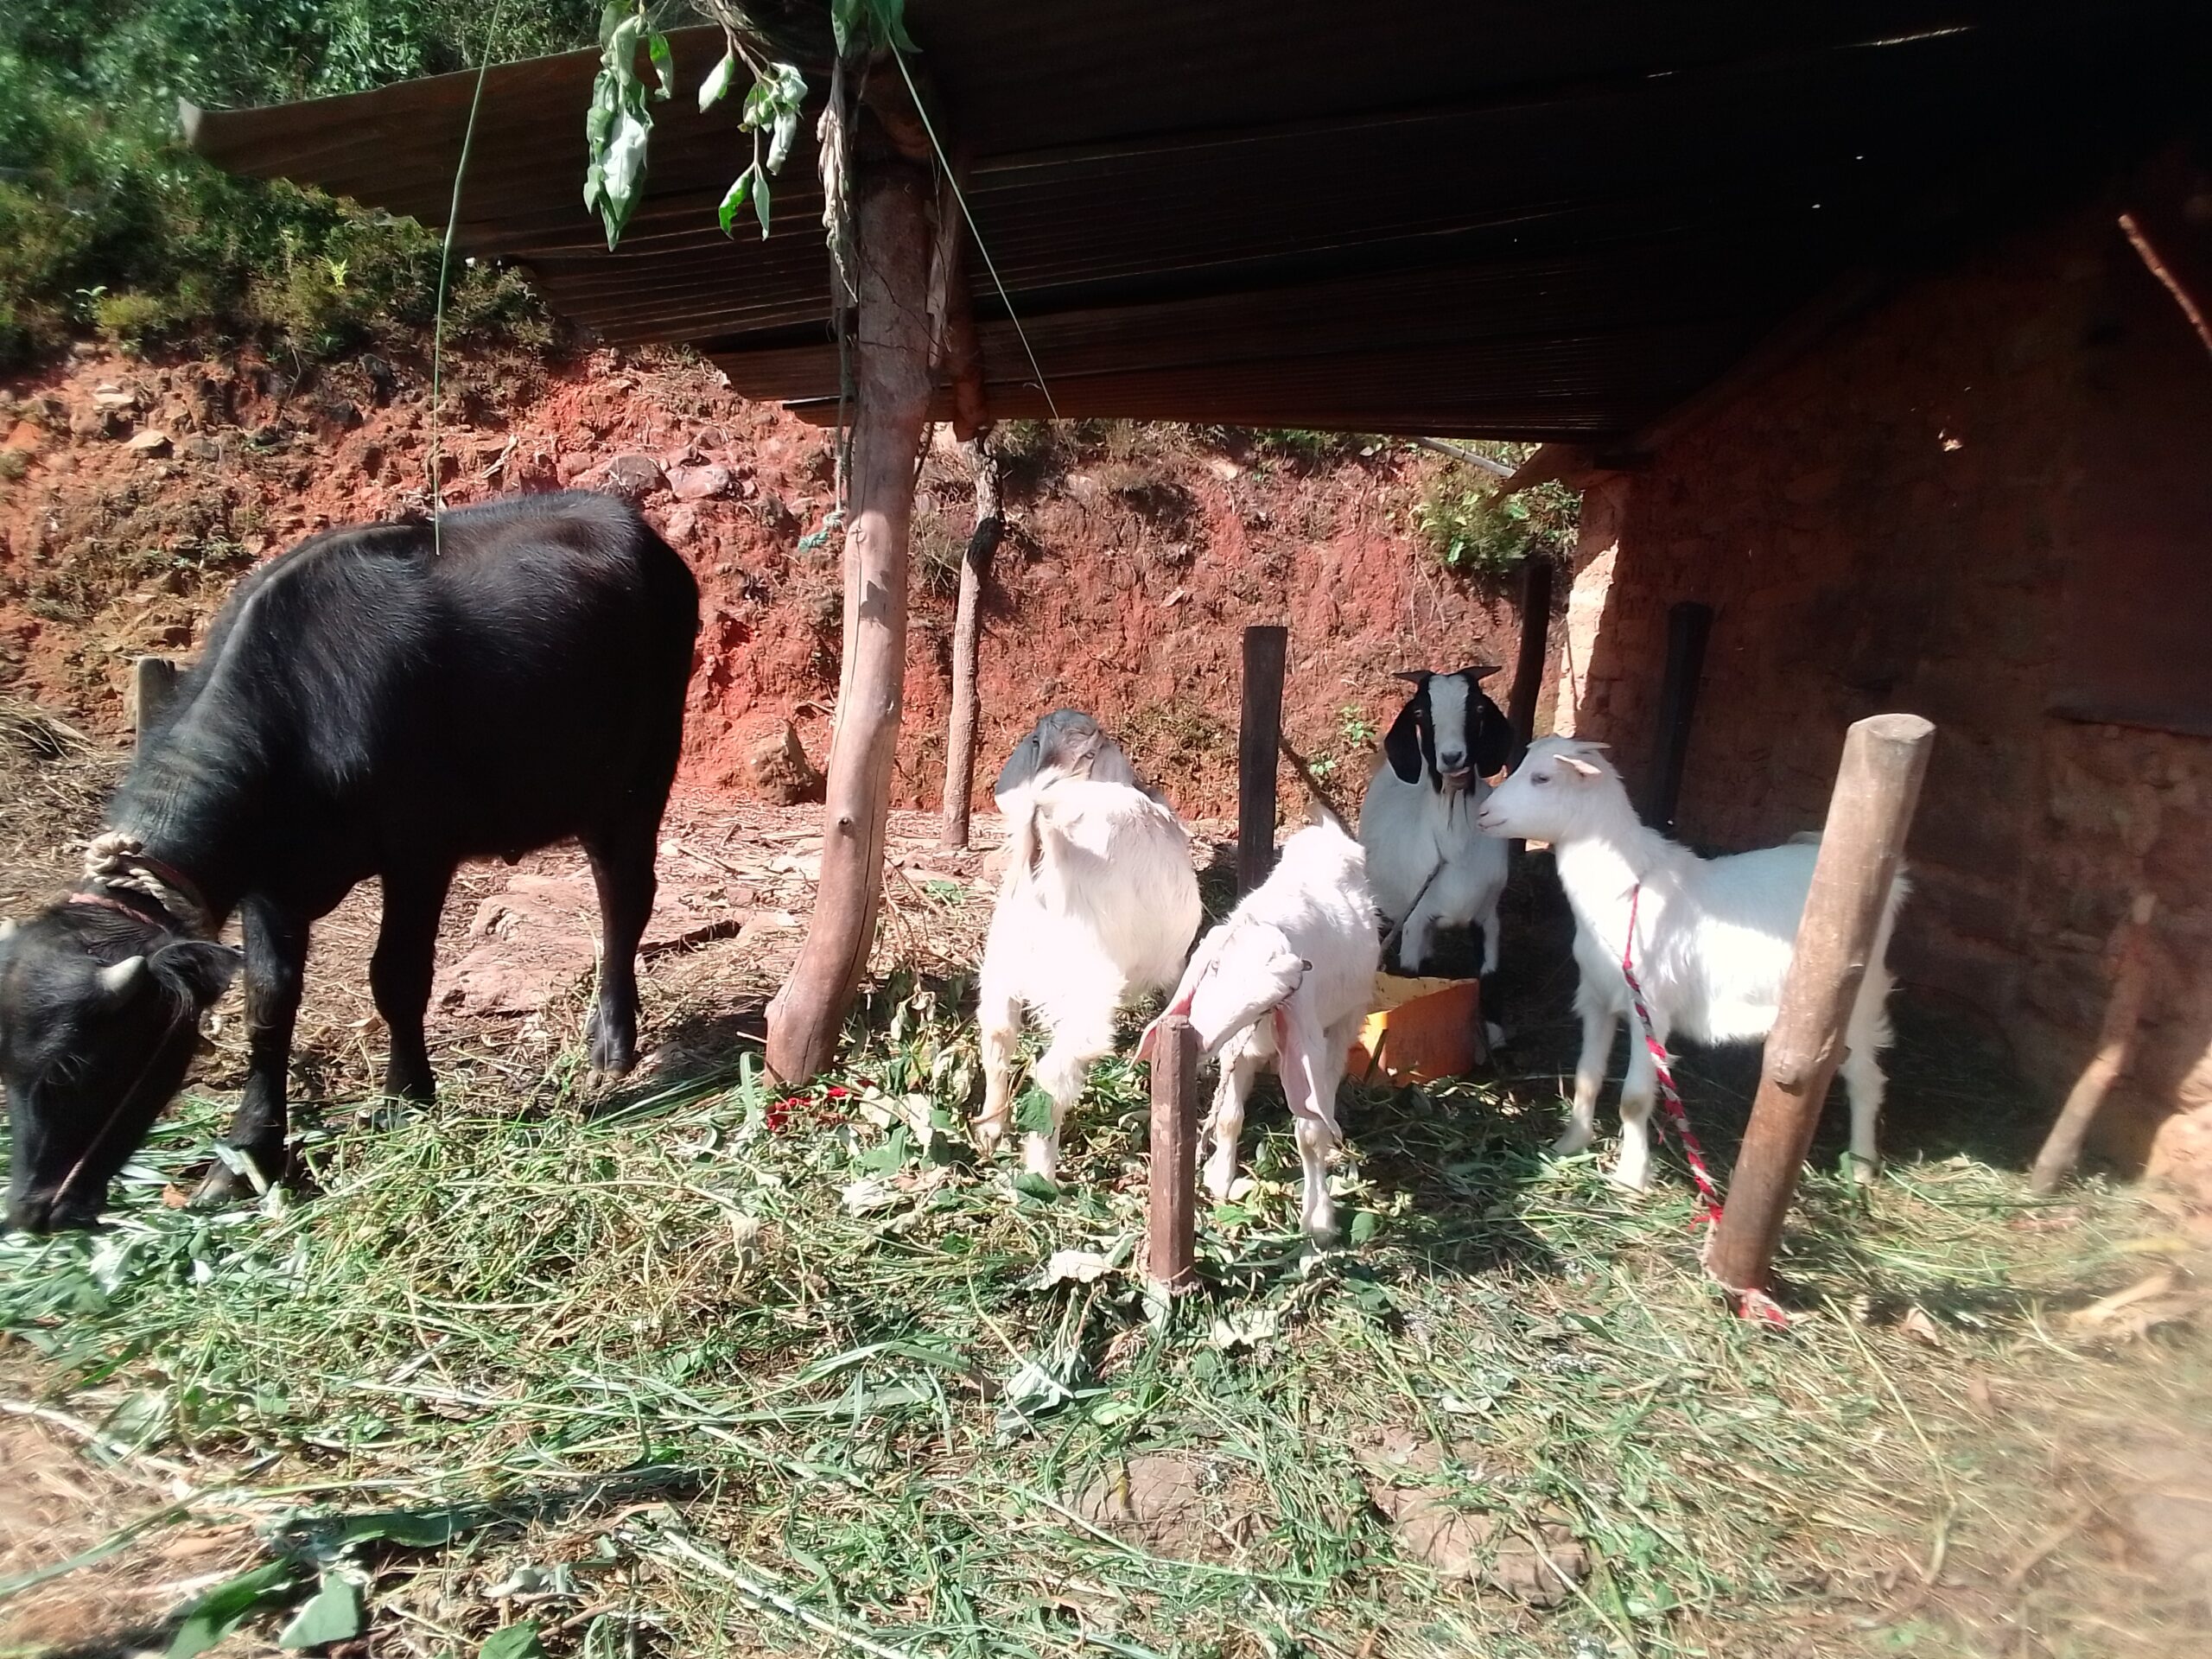 A black cow and four white goats are eating grass. They are standing under an awning made out of sheet metal, which belongs to a stable.